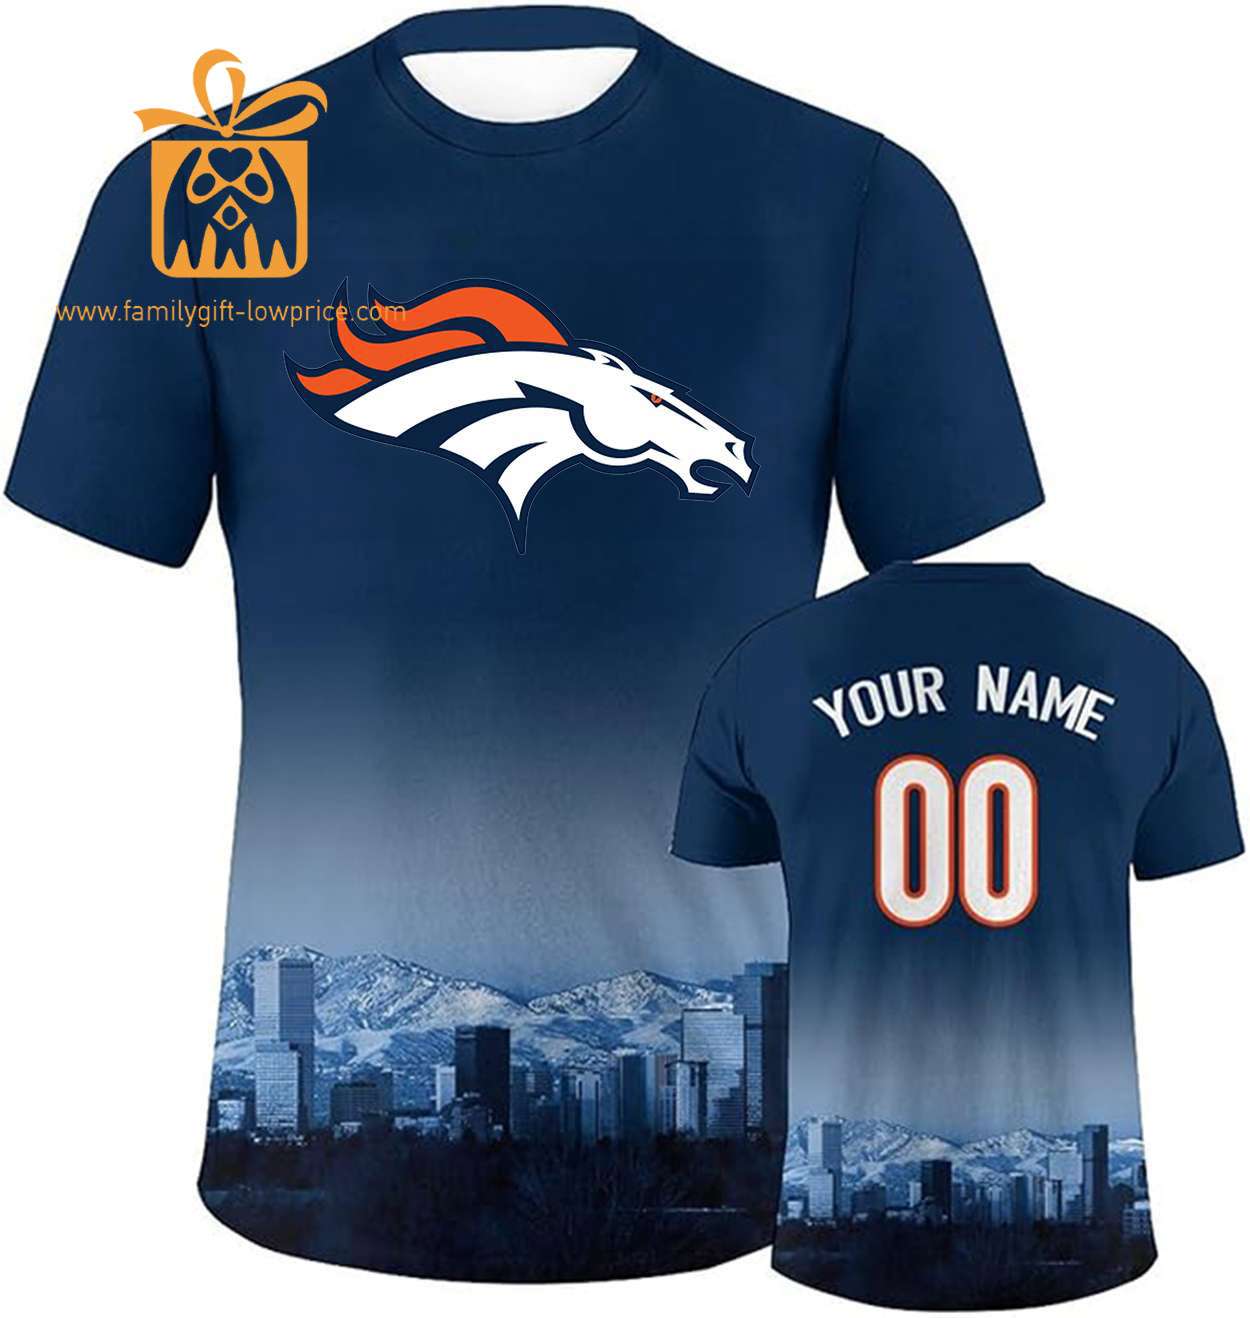 Denver Broncos Custom Football Shirts – Personalized Name & Number, Ideal for Fans